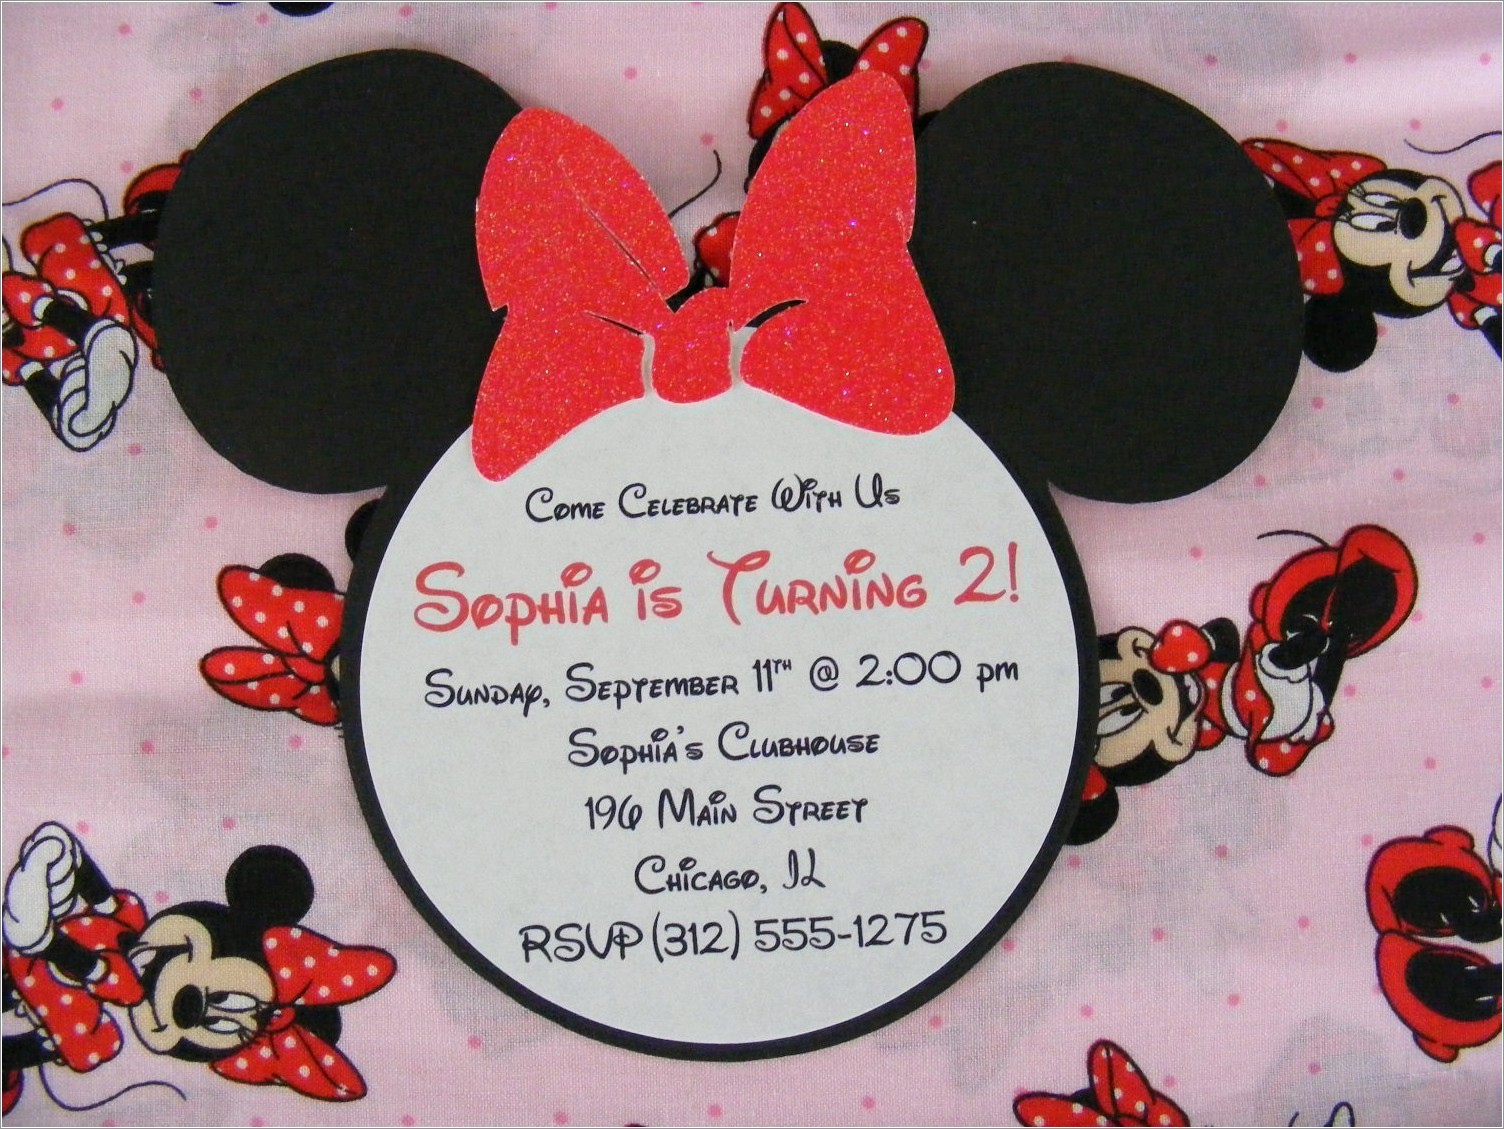 Mickey Mouse Invitations In Spanish